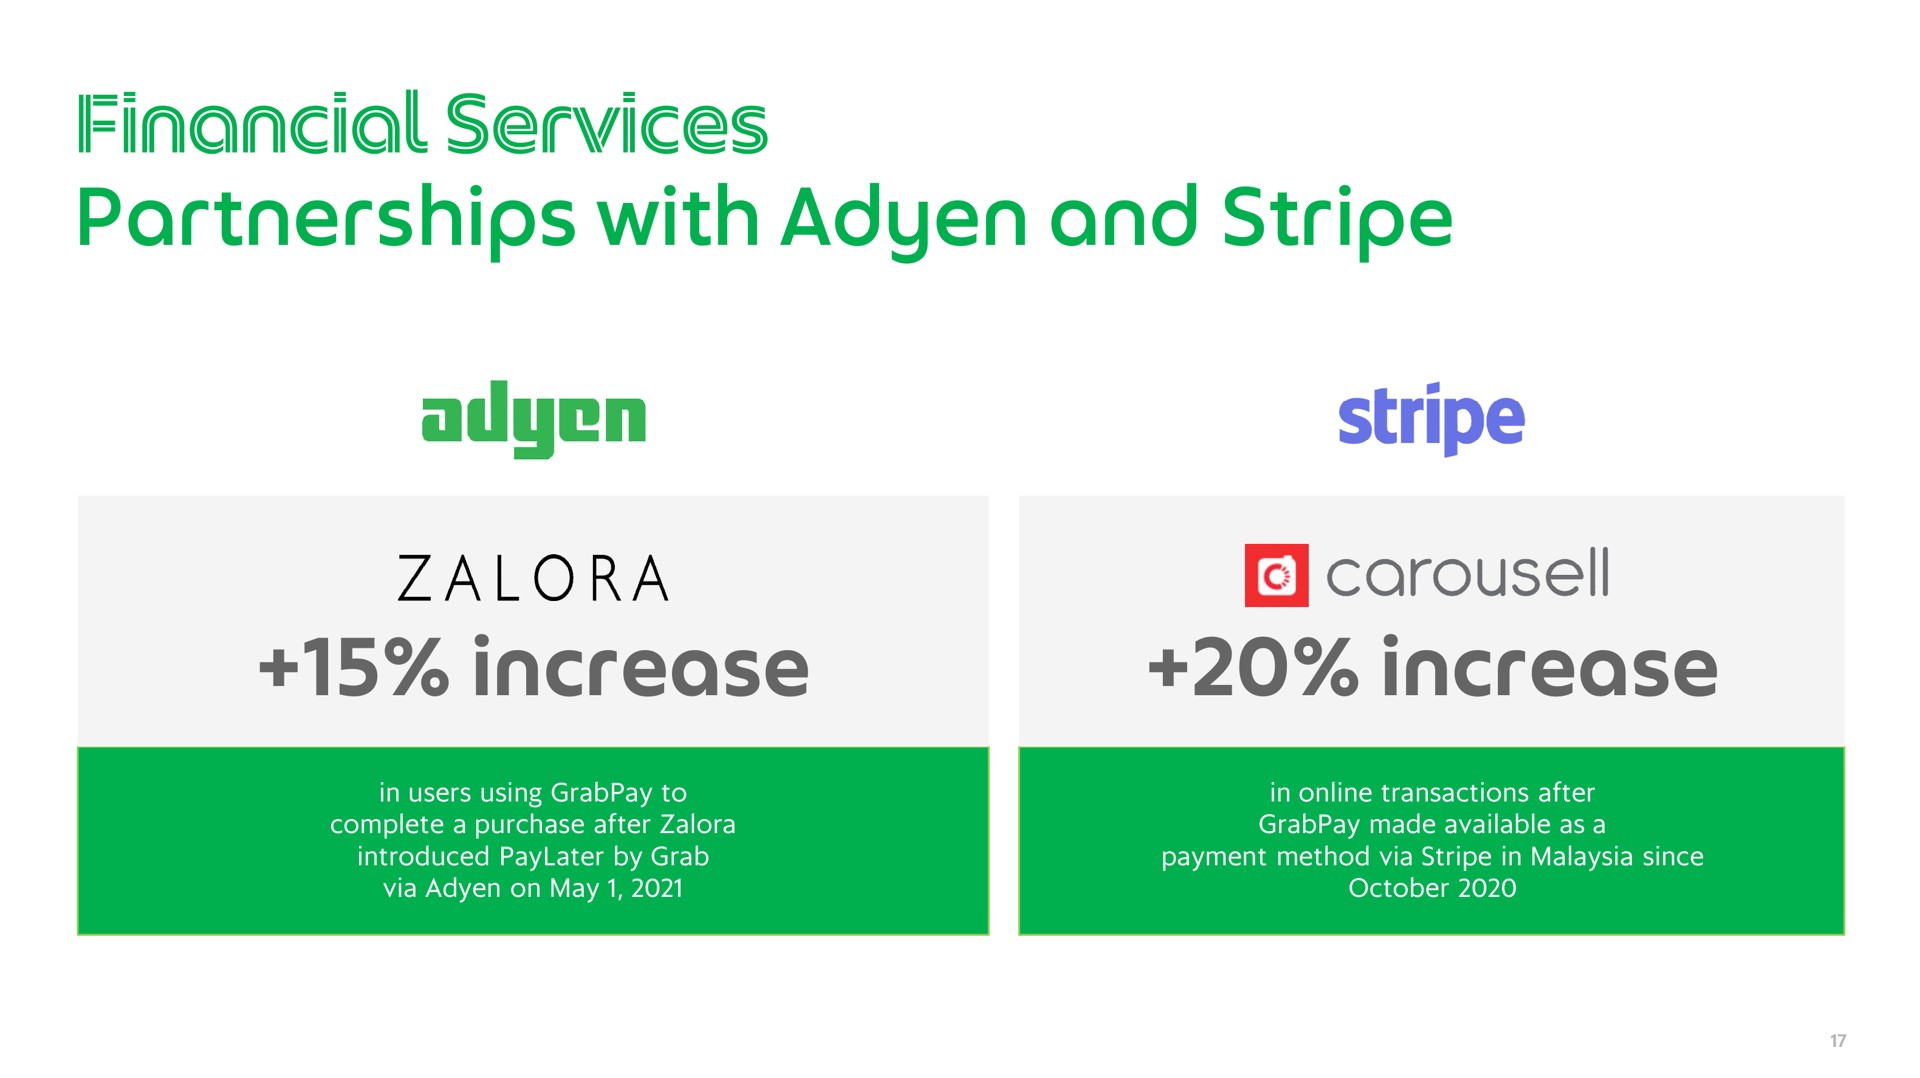 partnerships with and stripe increase increase financial services | Grab